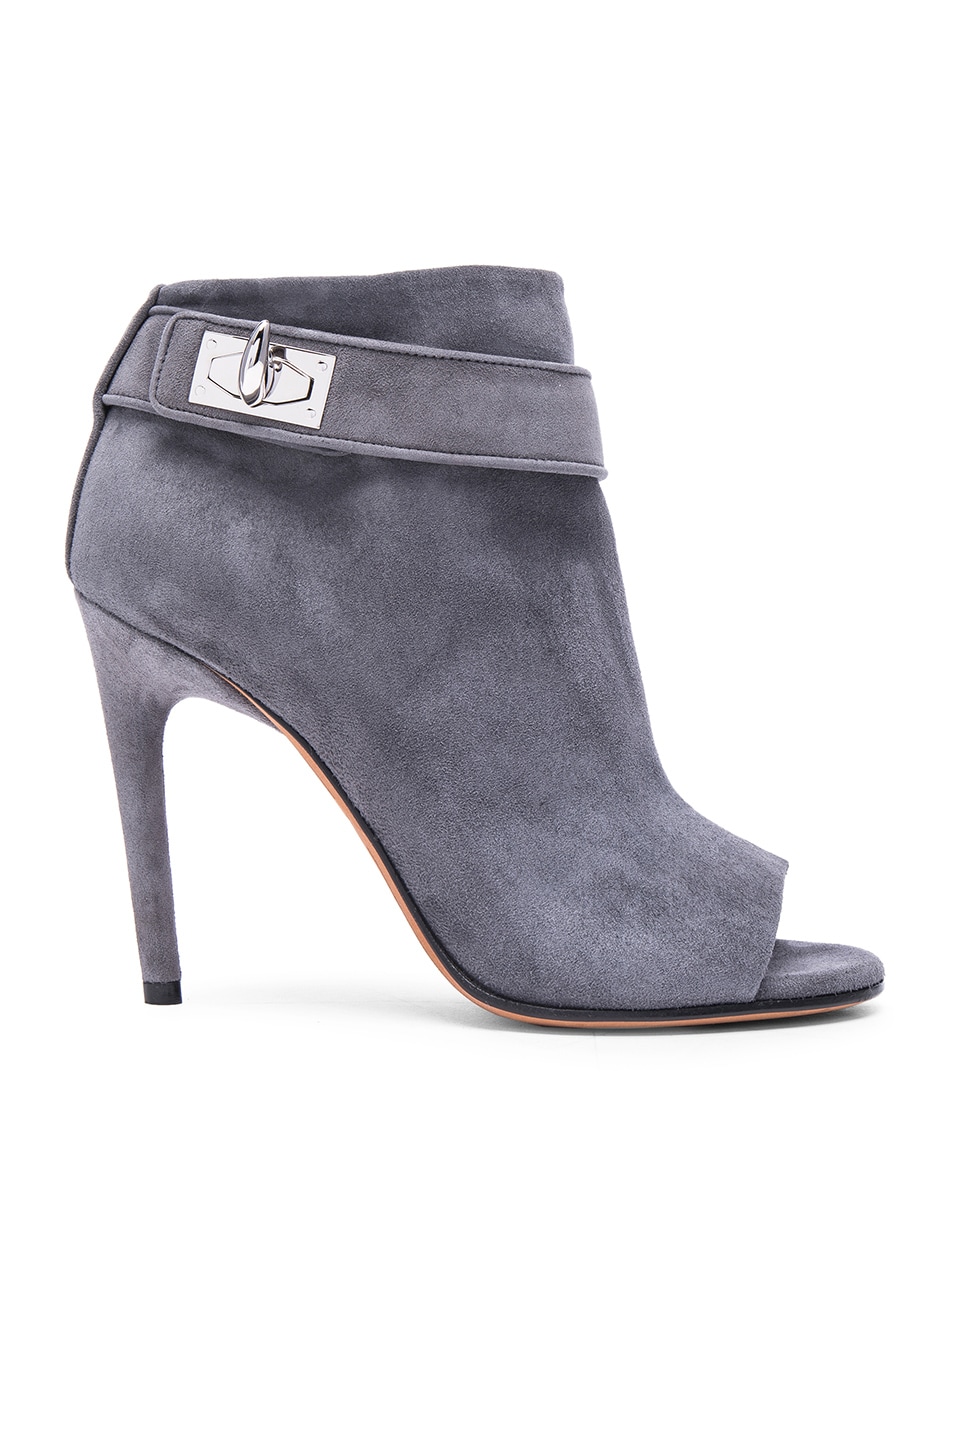 Image 1 of Givenchy Ryka Suede Booties in Dark Grey